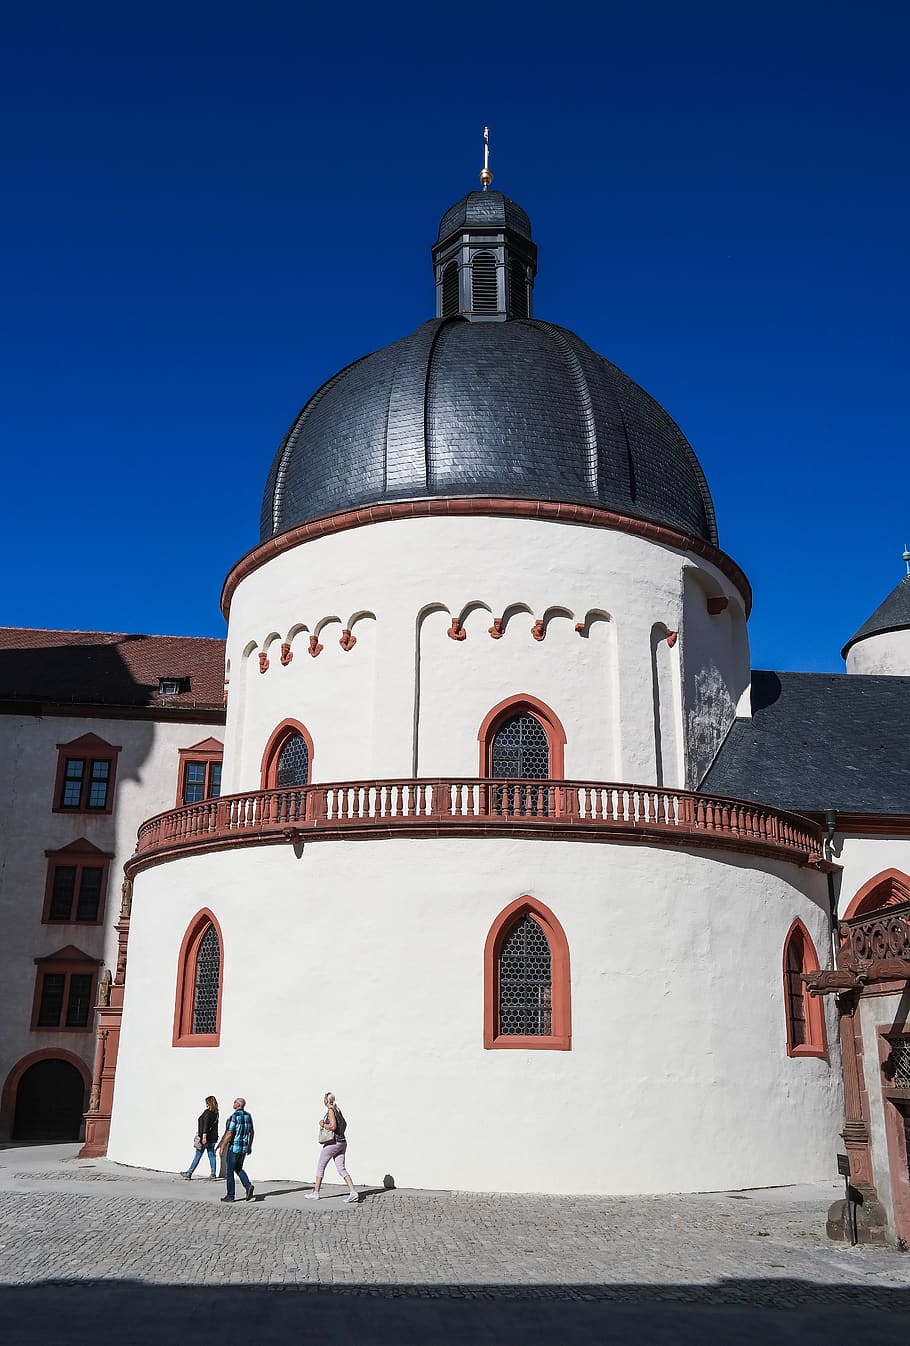 st mary's church, church, russian fortress, würzburg, rotunda, early romanesque, historically, places of interest, building exterior, built structure